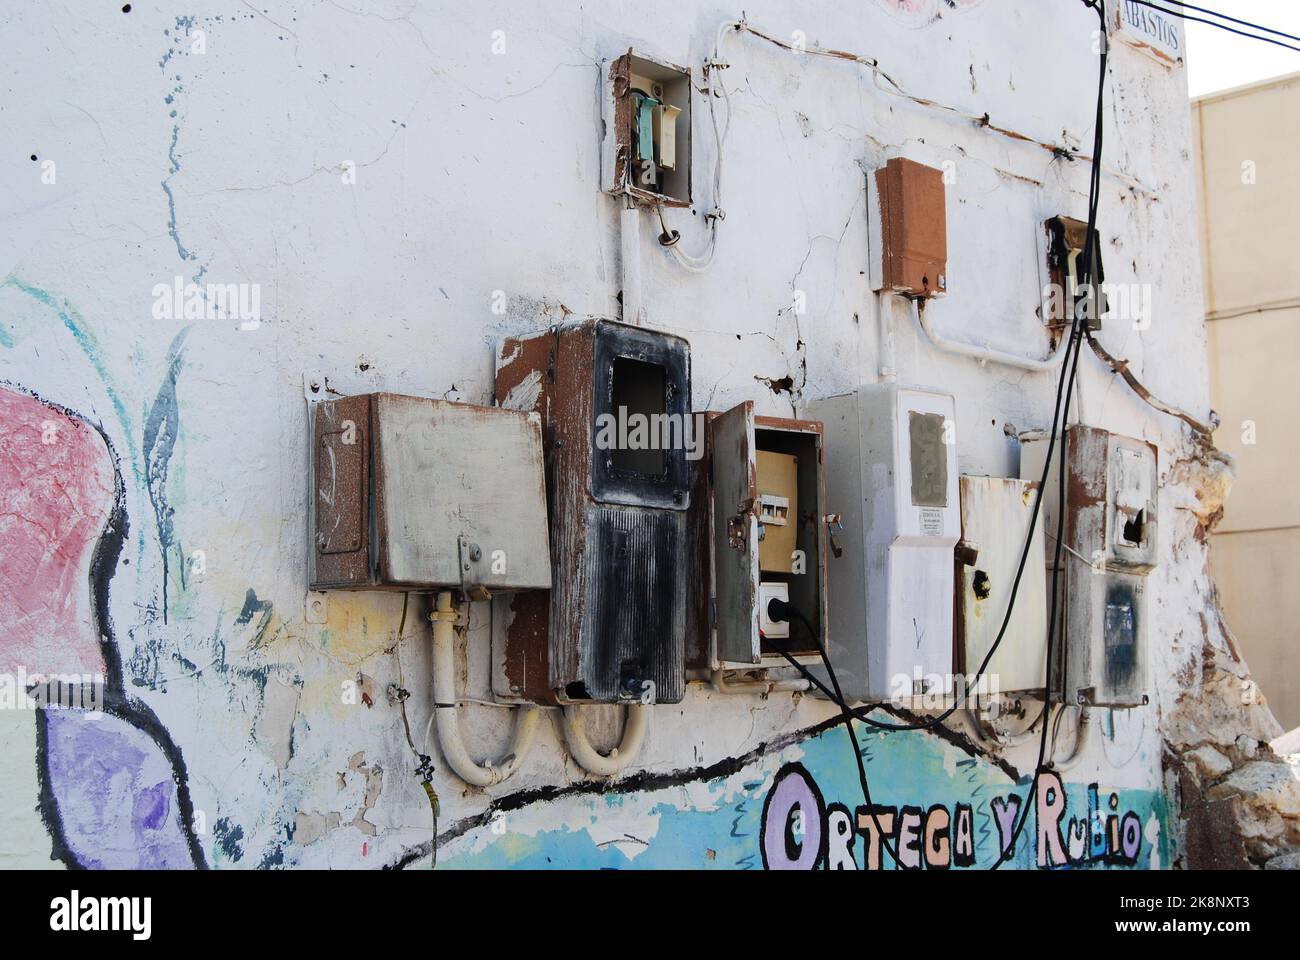 https://c8.alamy.com/comp/2K8NXT3/old-electric-boxes-on-a-painted-wall-in-madrid-spain-2K8NXT3.jpg